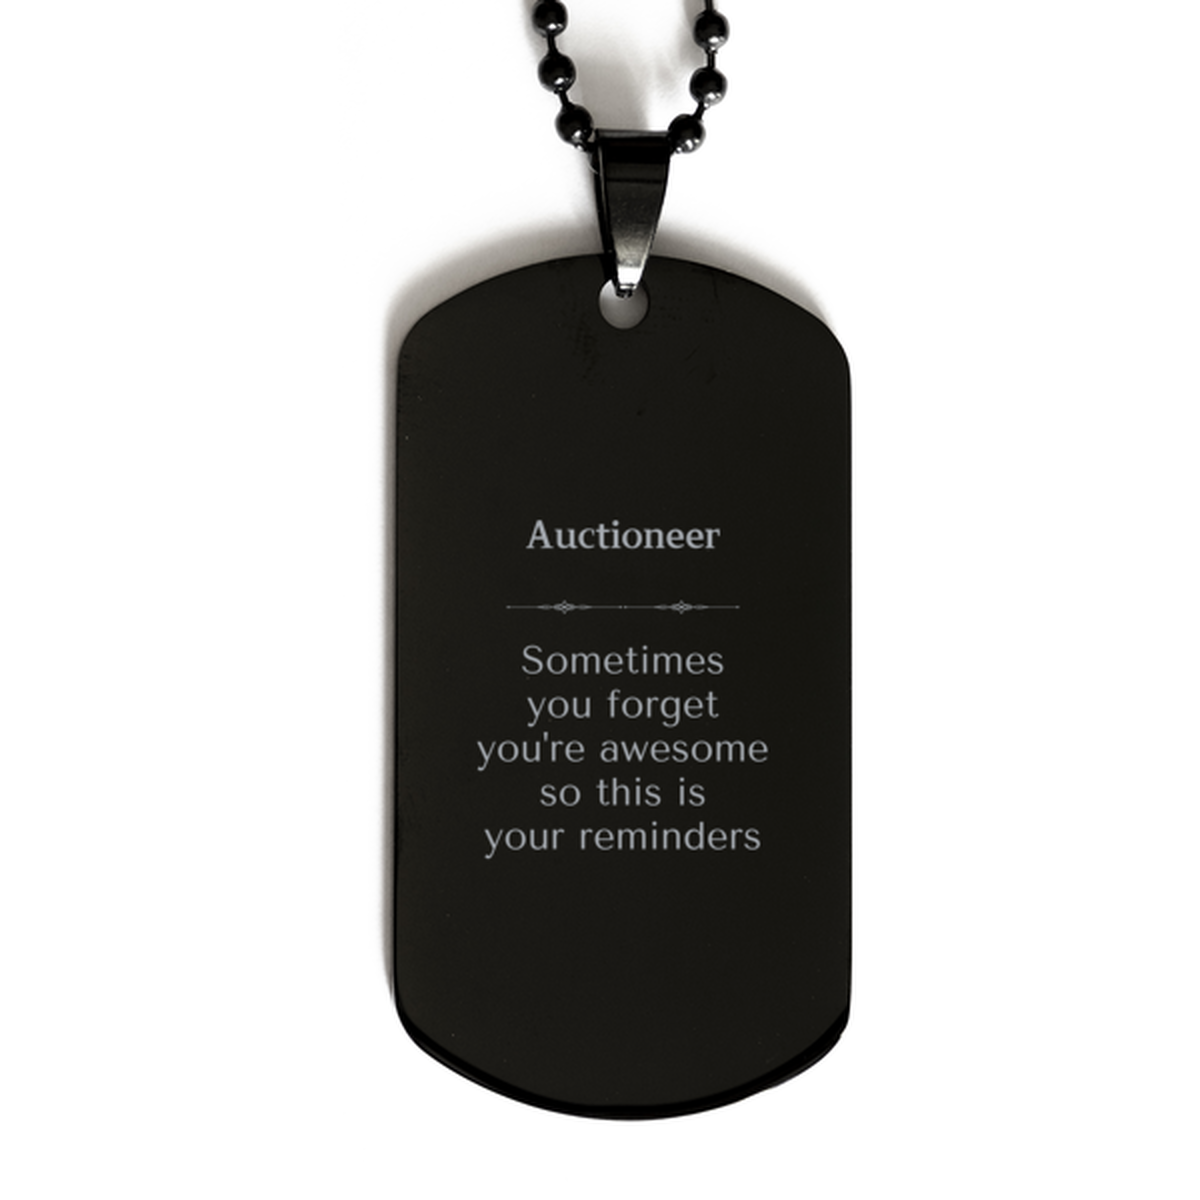 Sentimental Auctioneer Black Dog Tag, Auctioneer Sometimes you forget you're awesome so this is your reminders, Graduation Christmas Birthday Gifts for Auctioneer, Men, Women, Coworkers